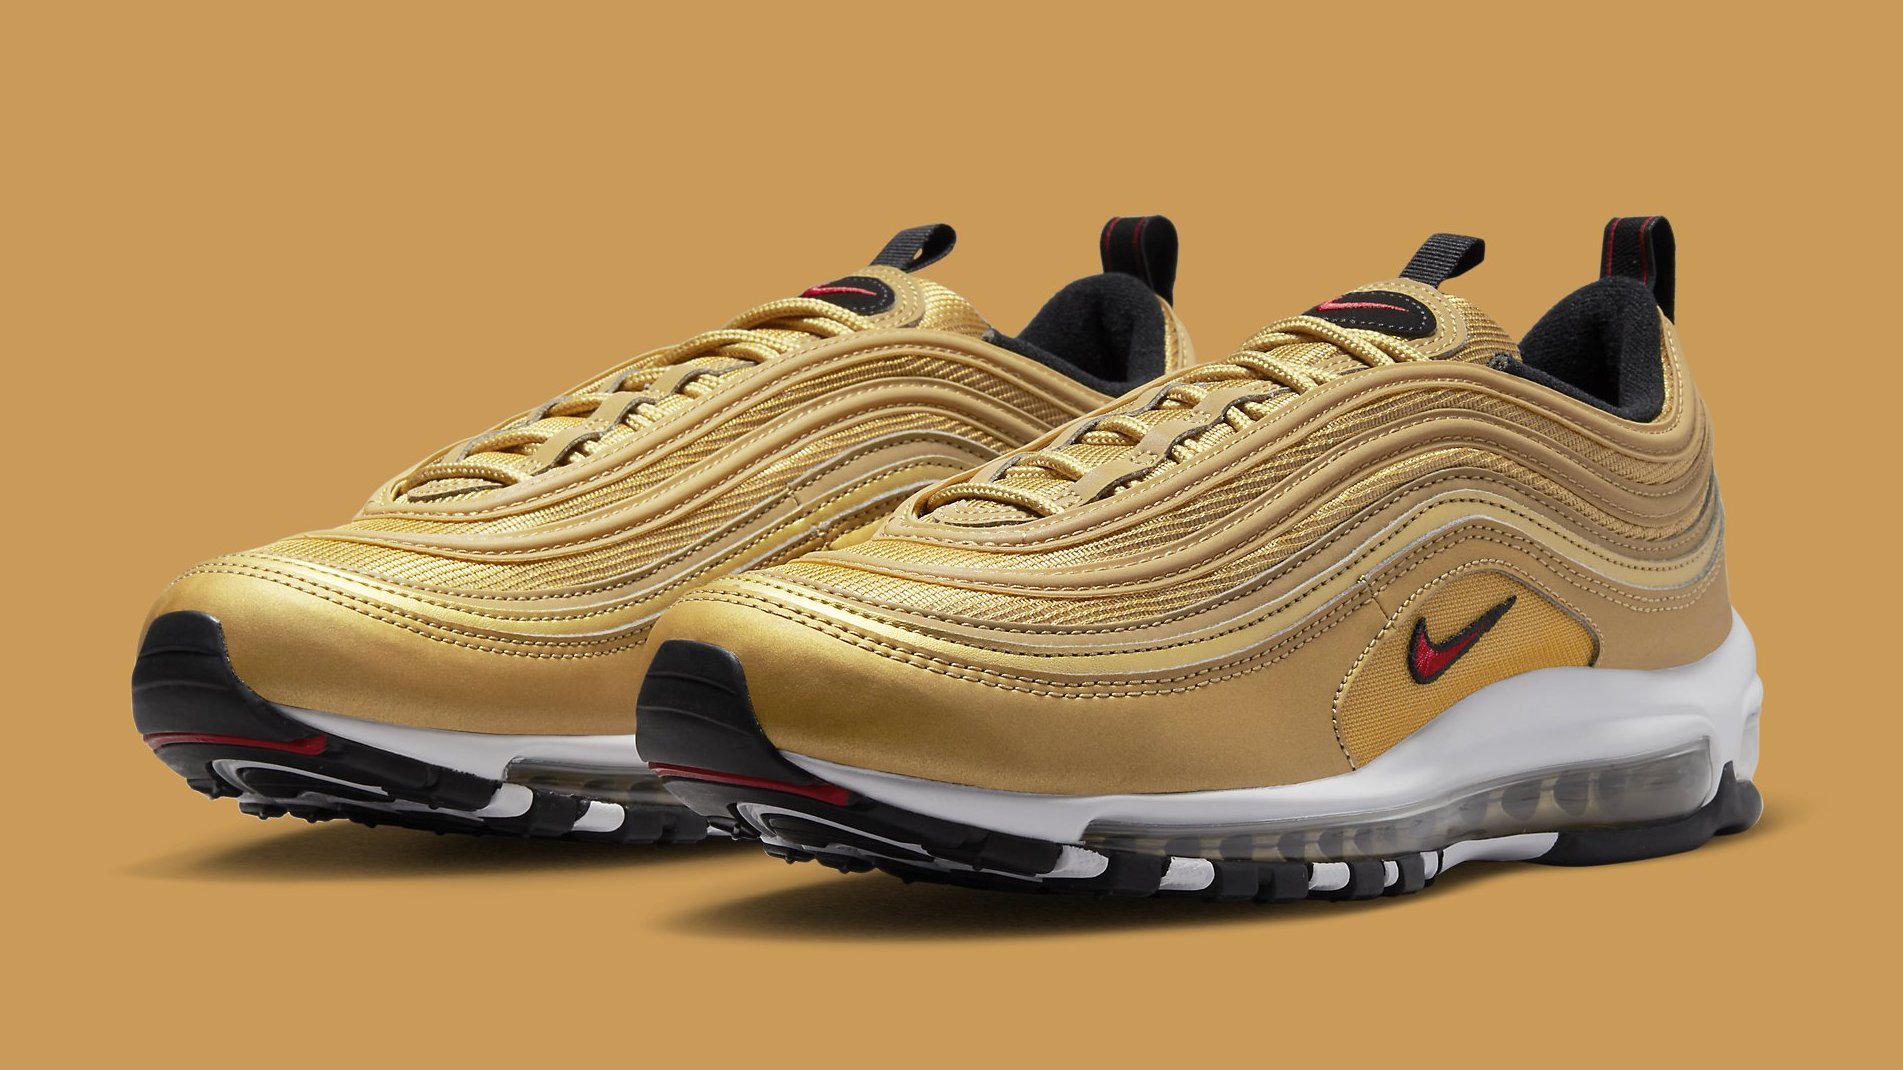 Naughty Conductivity Michelangelo Nike Air Max 97 'Gold Bullet' Release Date 2023 DM0028-700​​​​​​​ | Sole  Collector